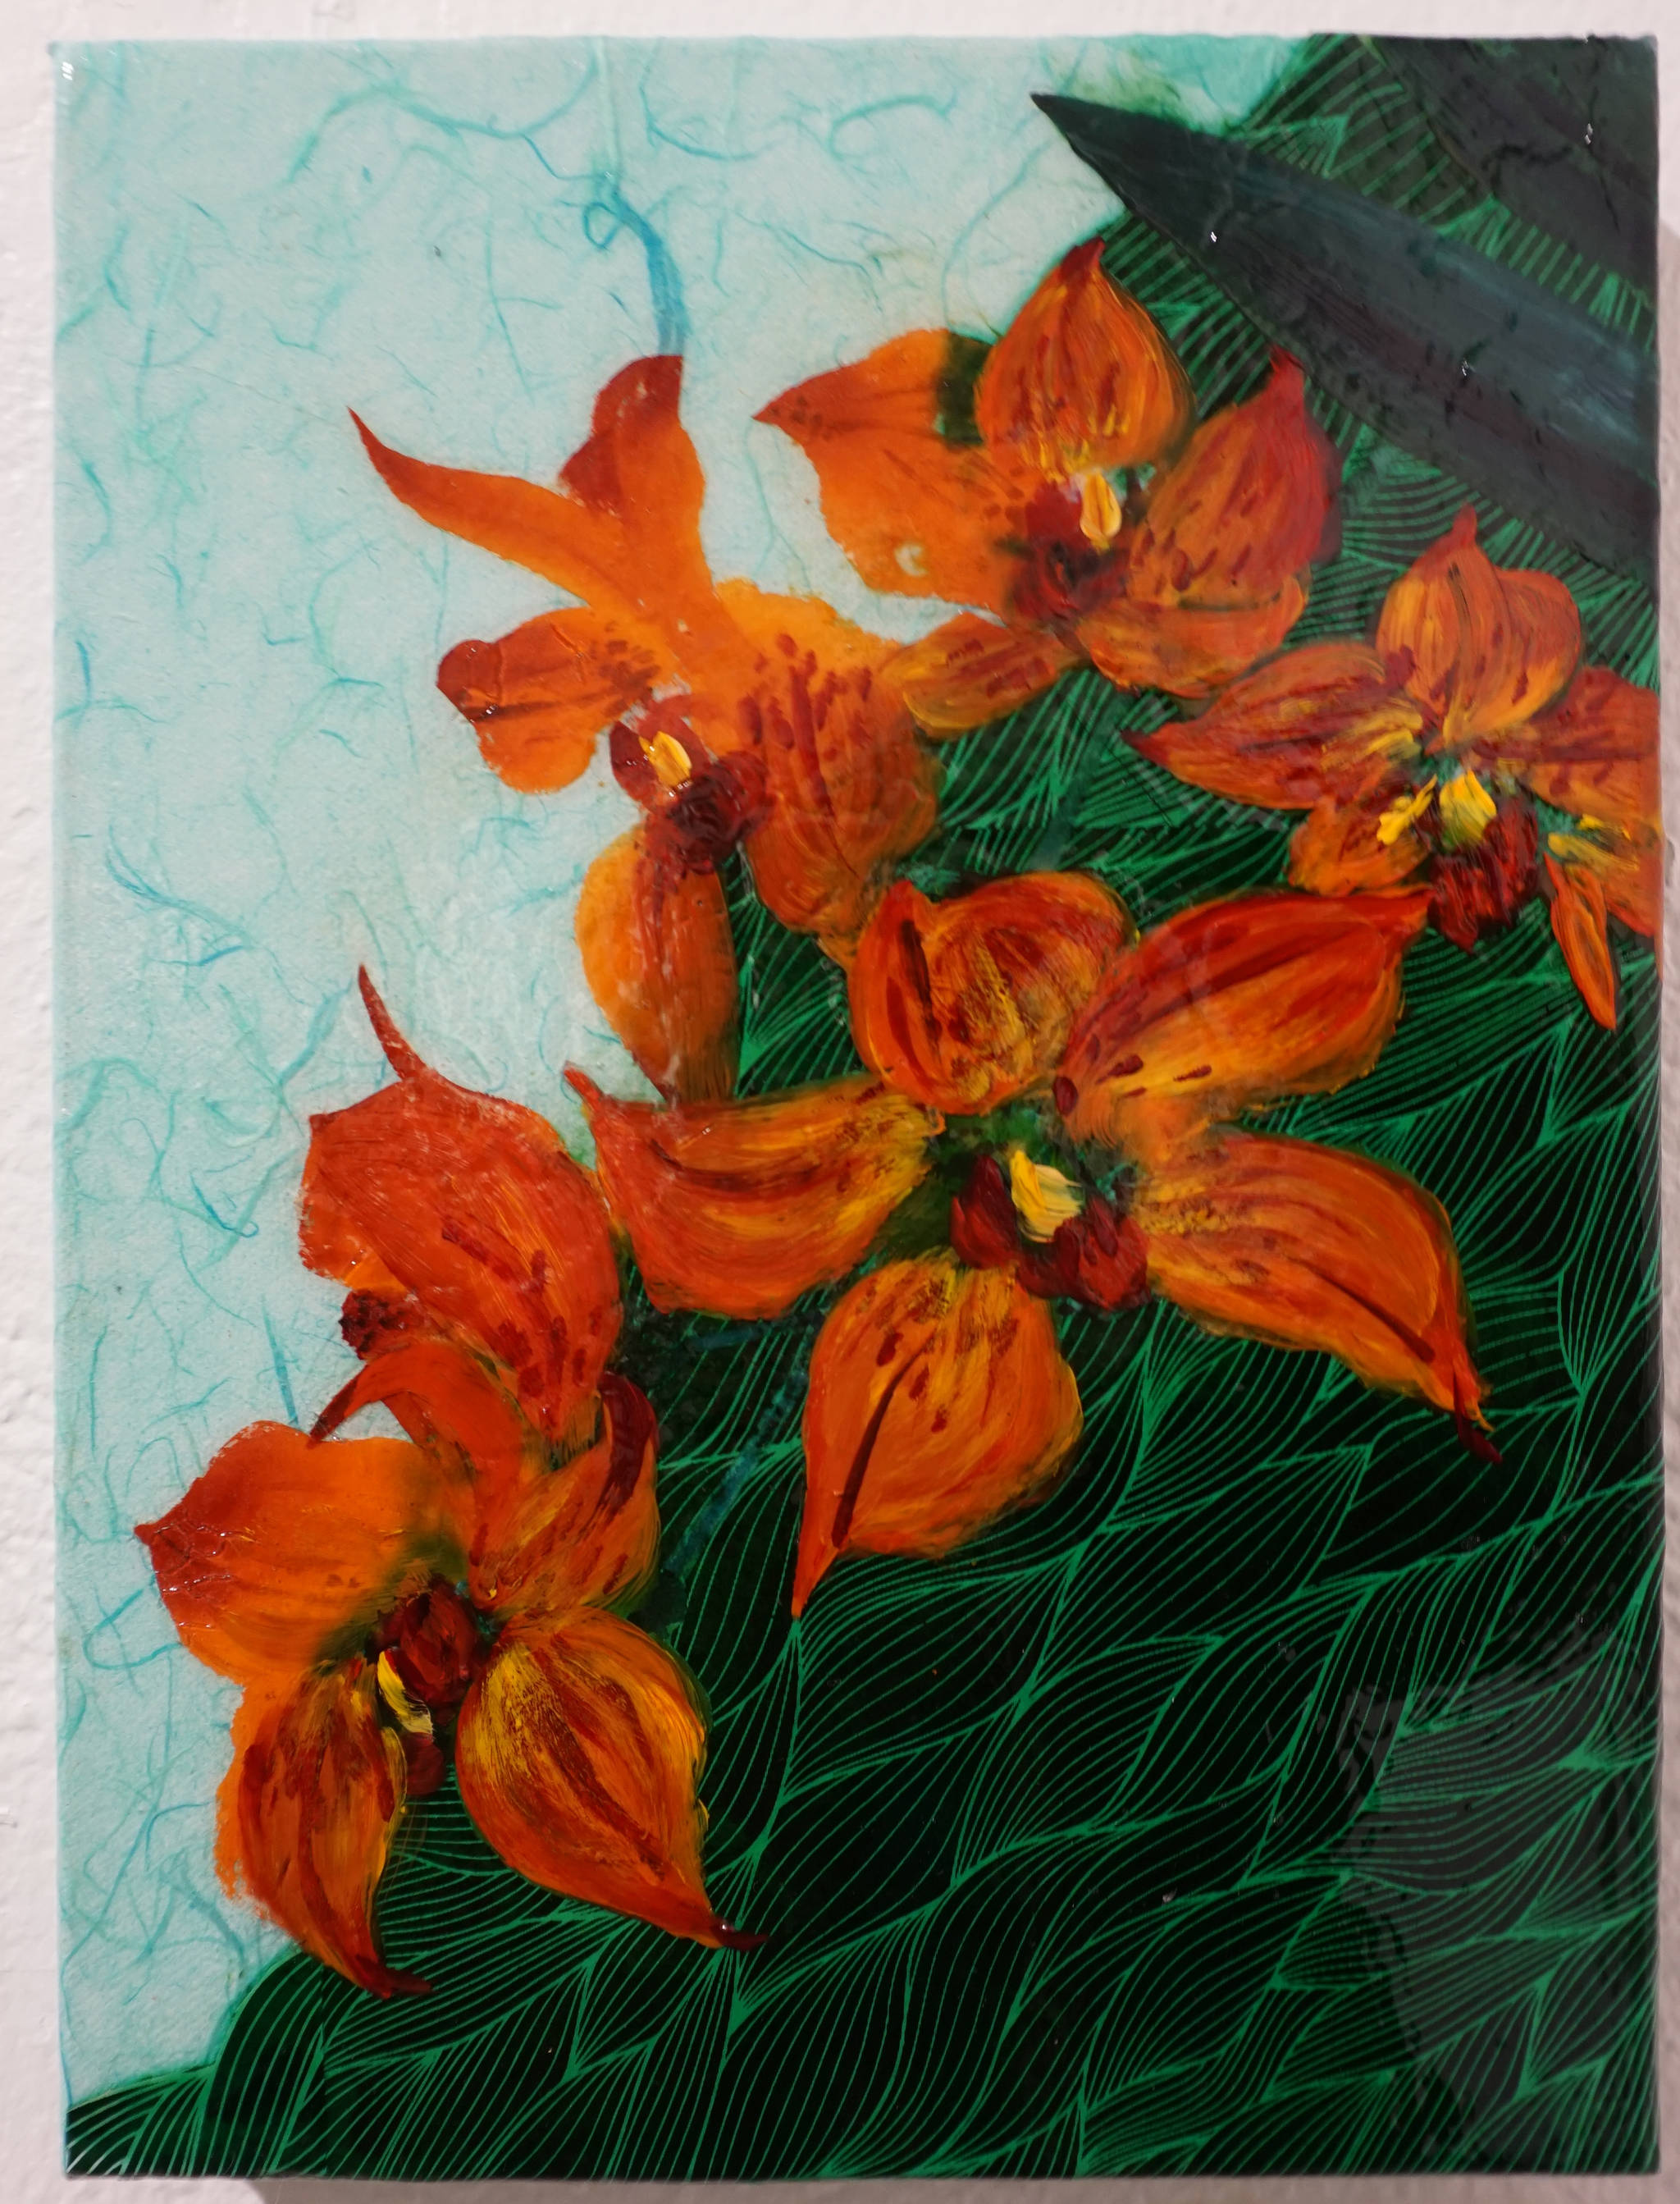 “Orange Orchid,” one of Sharlene Cline’s collages of a Chinese brush painting and other media, shown here Friday, Dec. 1, 2017 at Ptarmigan Arts in Homer, Alaska. (Photo by Michael Armstrong, Homer News)